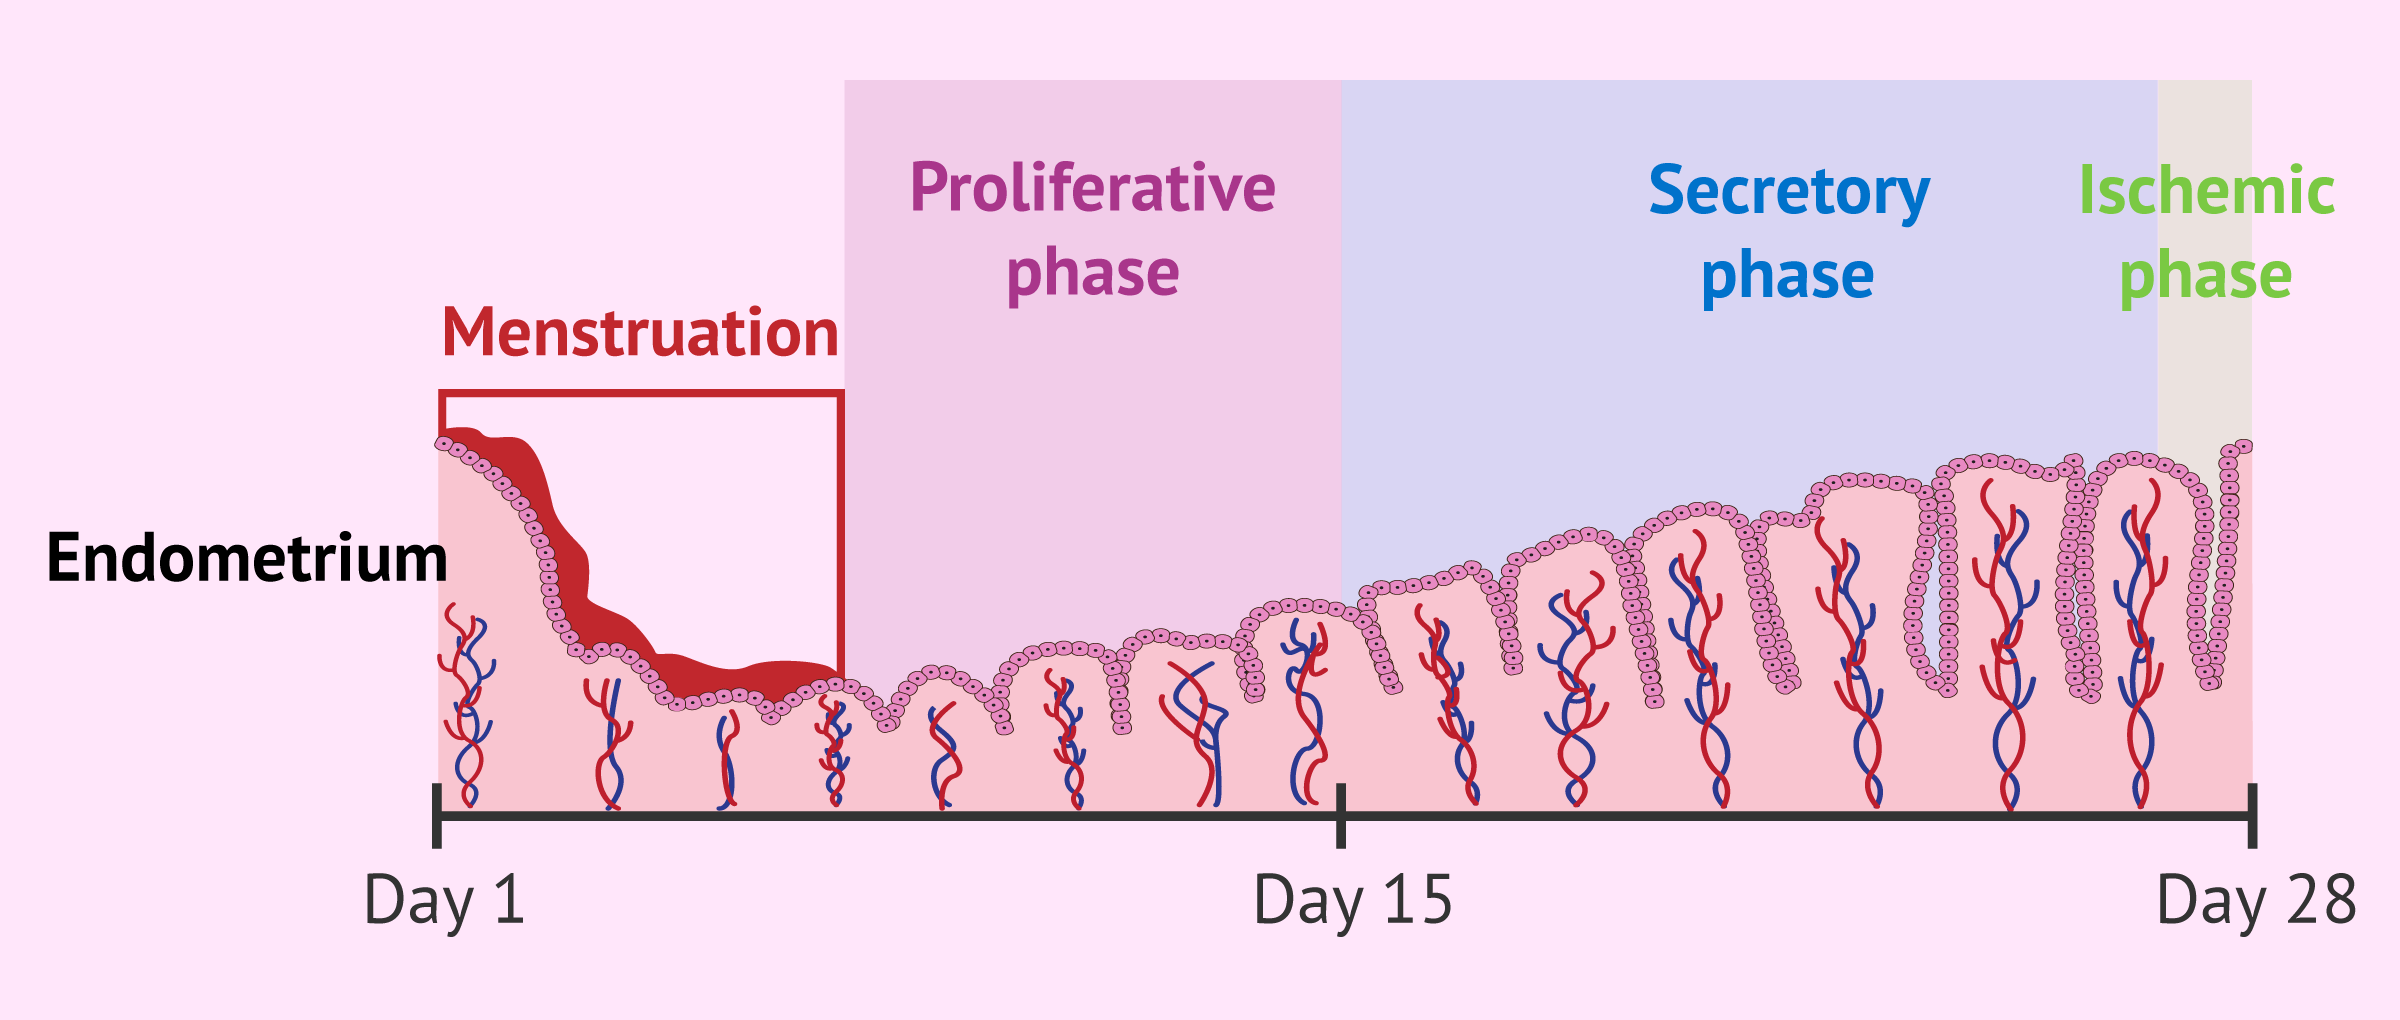 Ischemic phase of the menstrual cycle